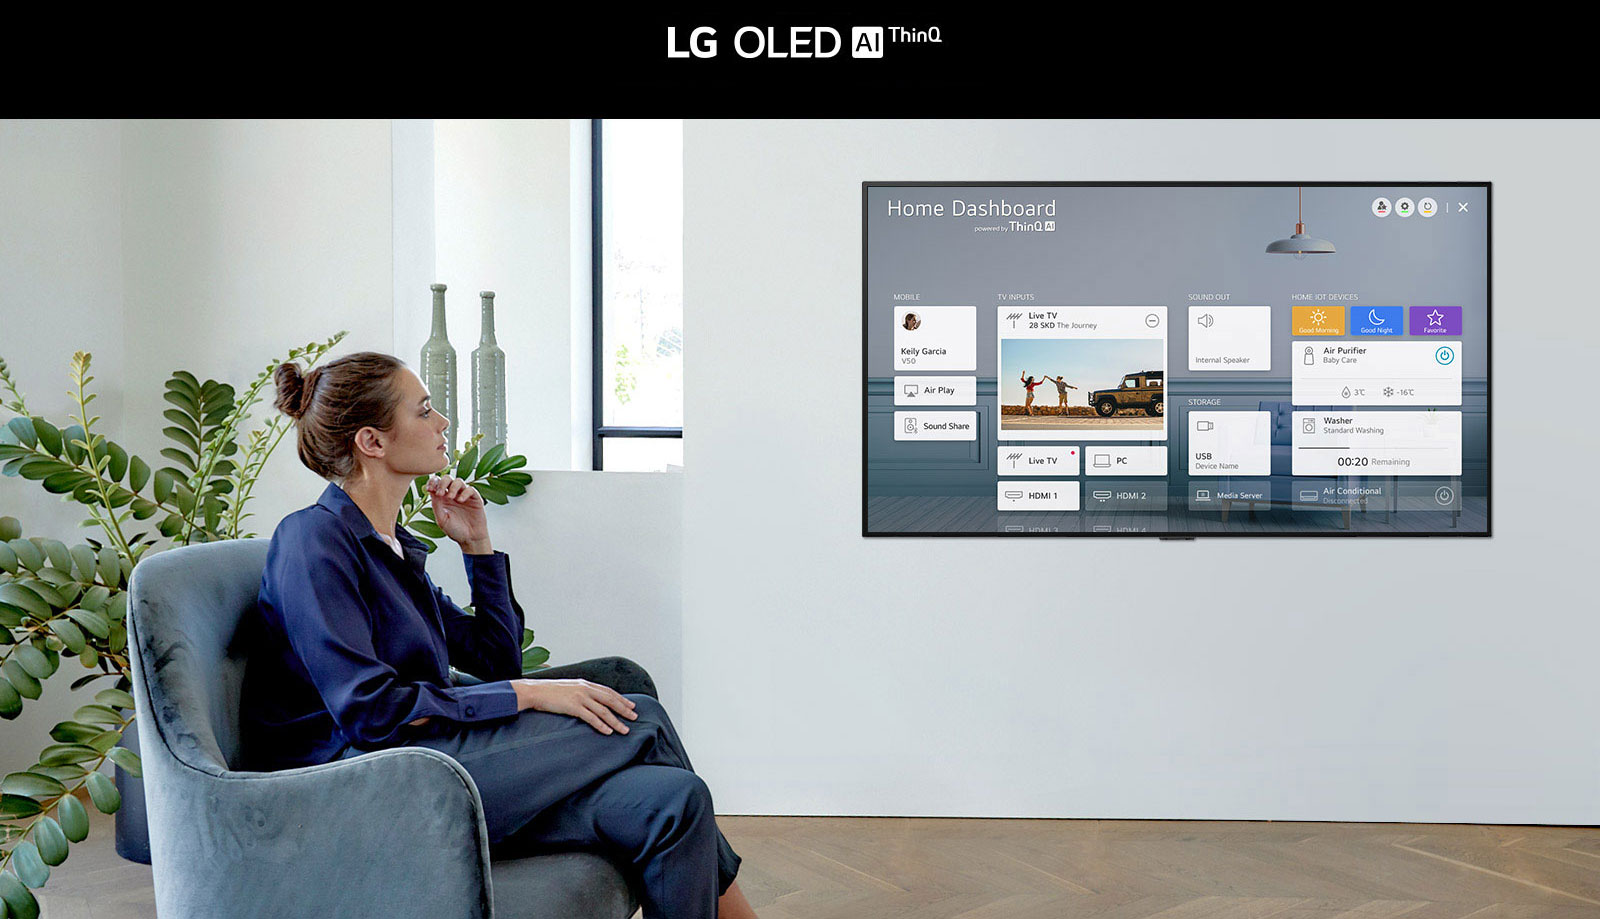 Woman sitting on a chair in the living room with the Home Dashboard on the TV screen